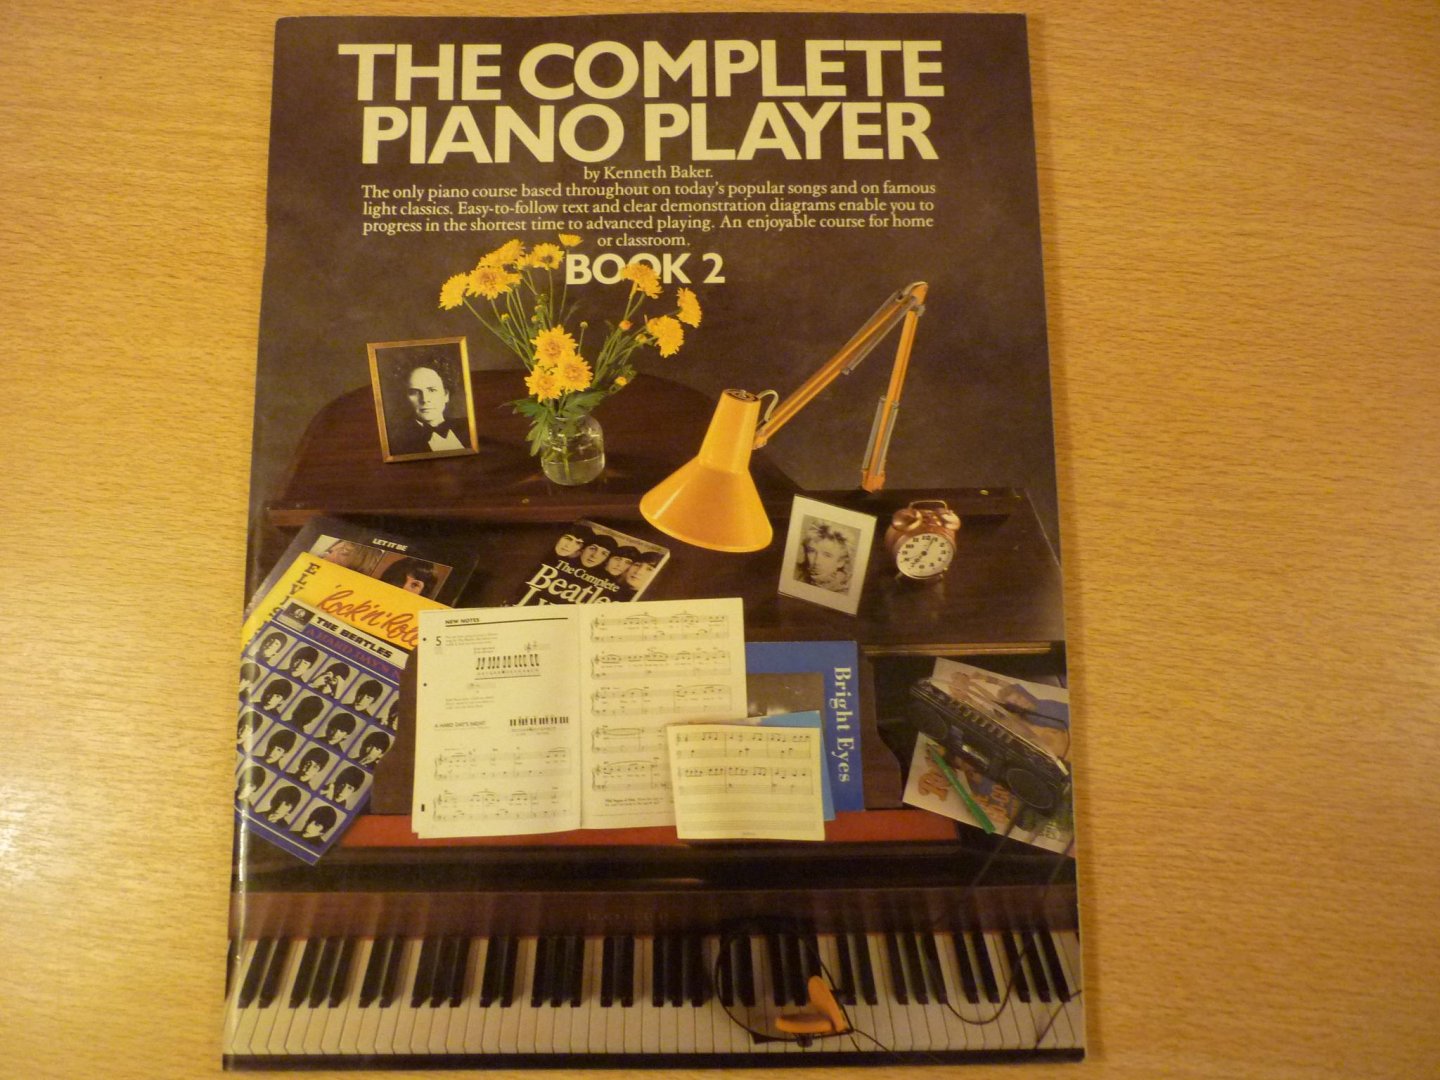 Baker; Kenneth - The Complete Piano Player - Book 2